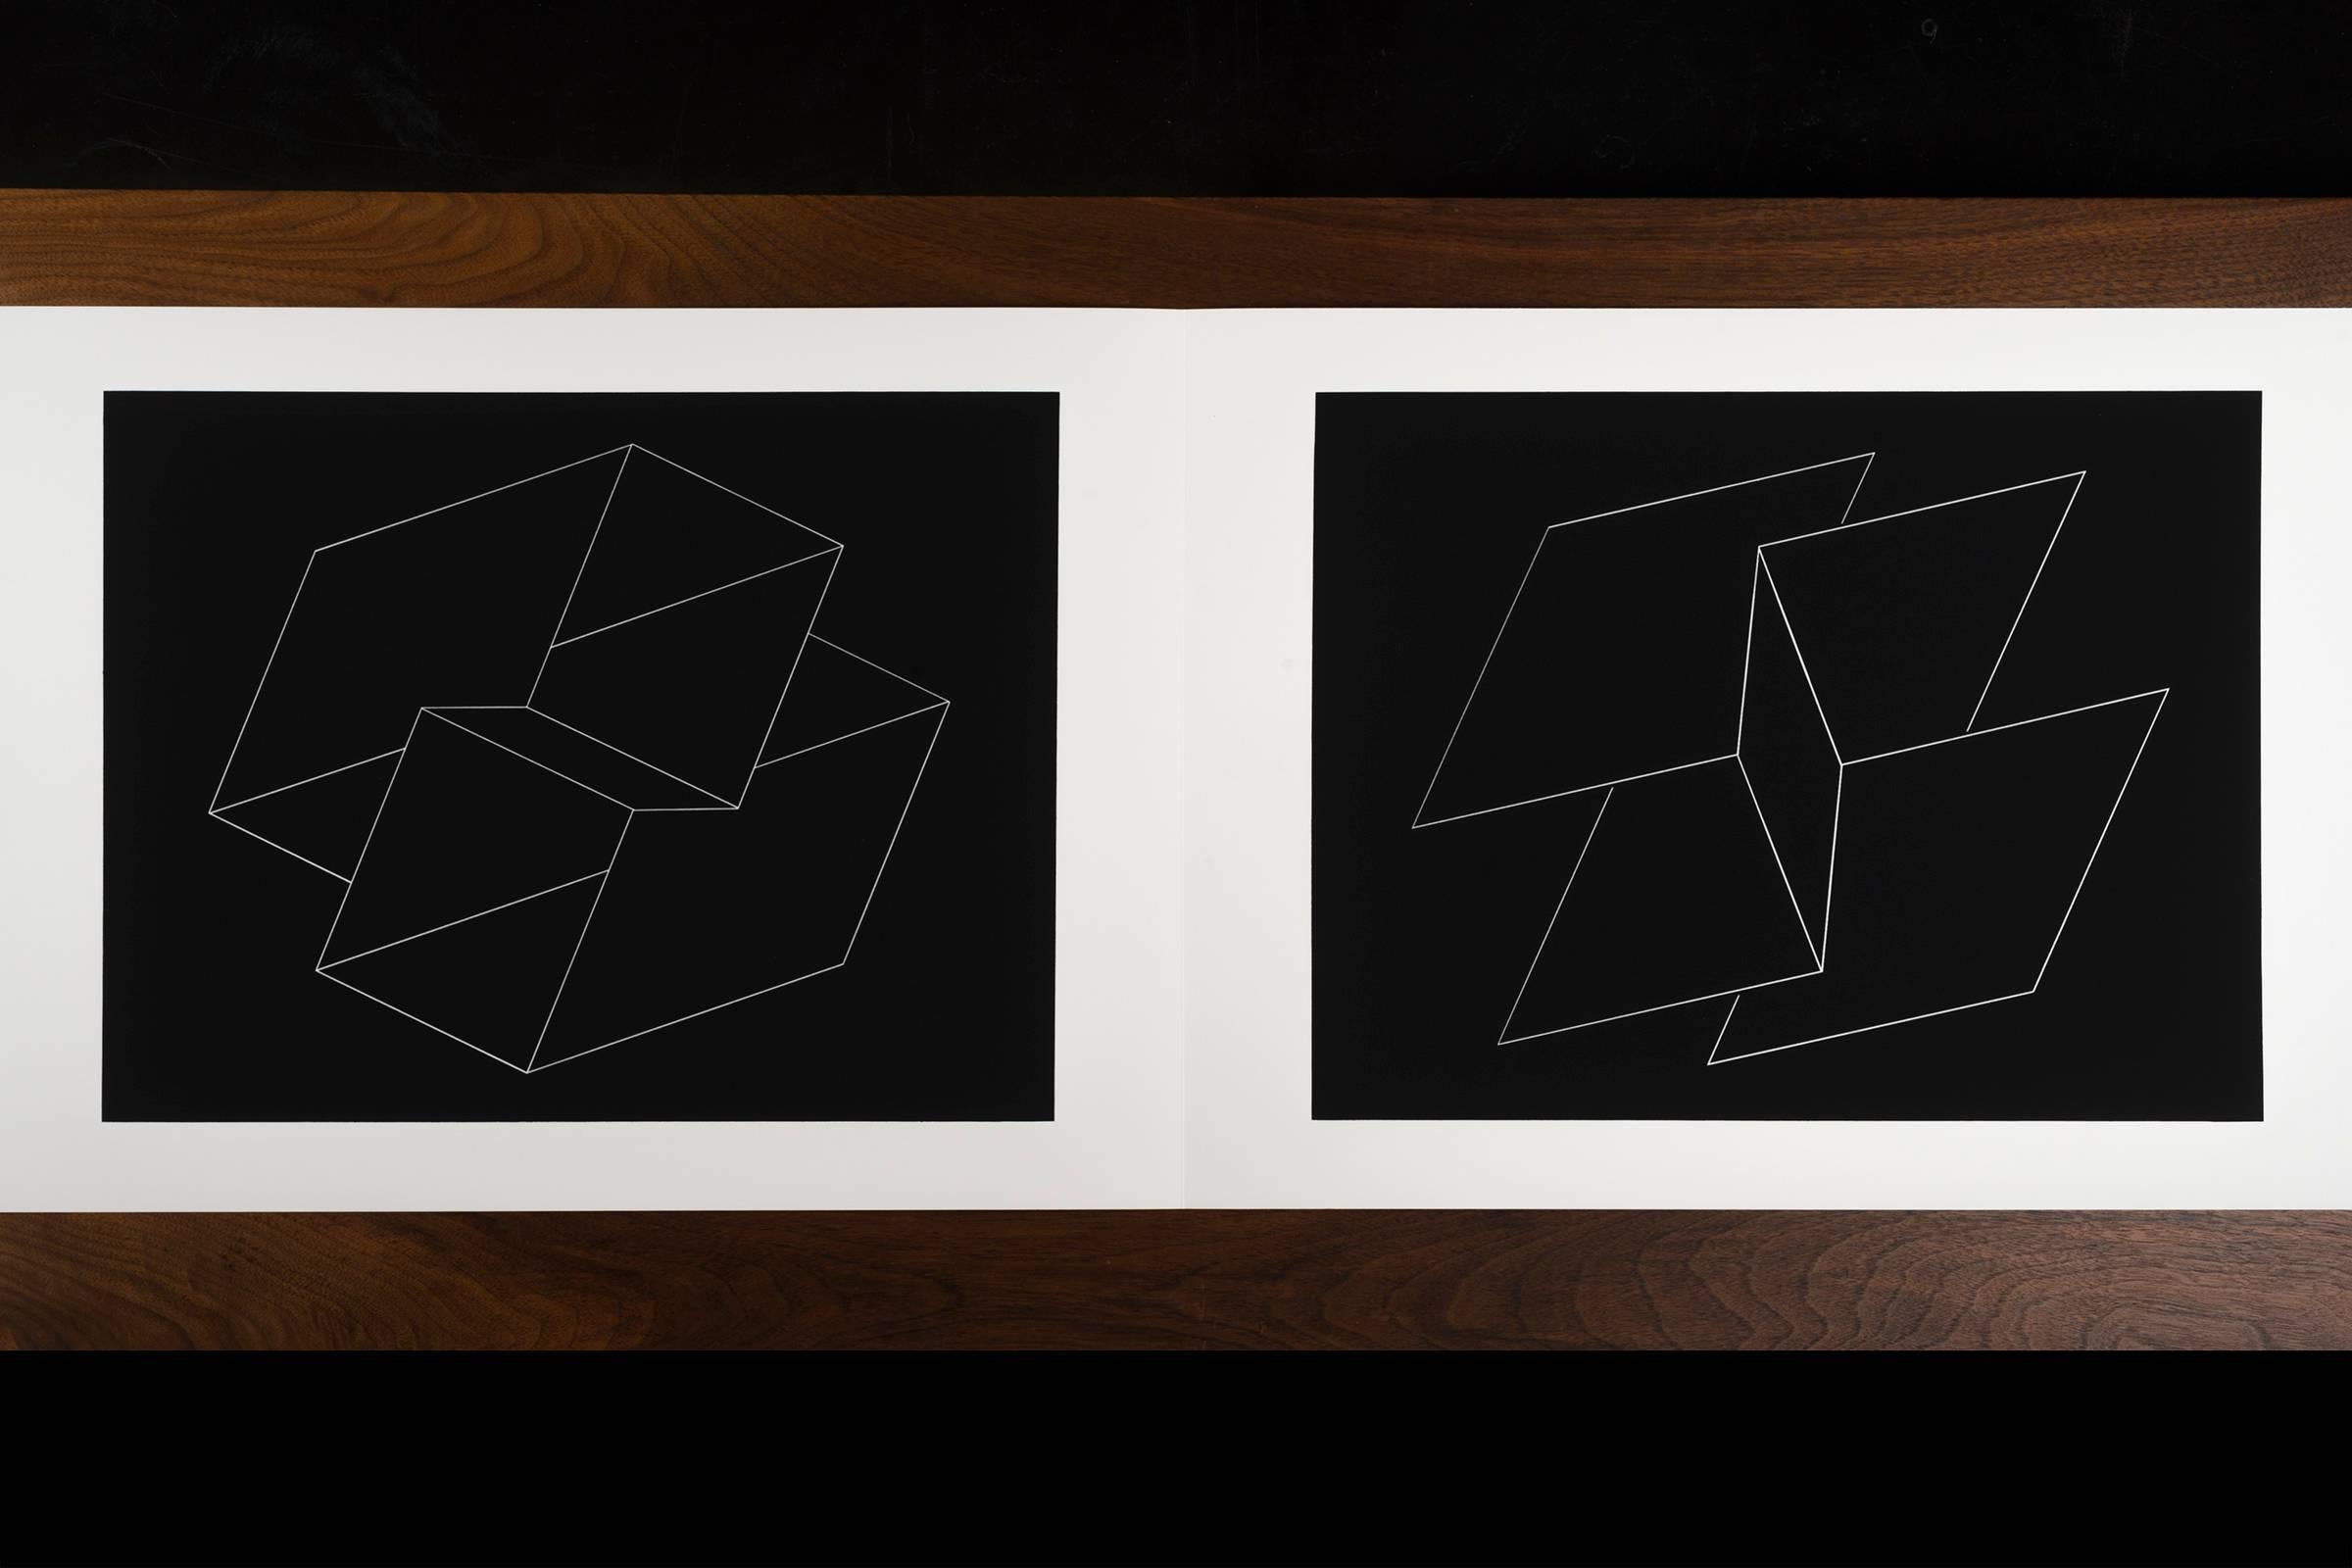 Josef Albers Formulations - Articulations I & II Print #10
Edition 974/1000
1972 screen-print on paper
Embossed with Josef Albers initials, portfolio and folder number. This work is published by Harry N. Abrams and Ives-Sillman.
This work has never